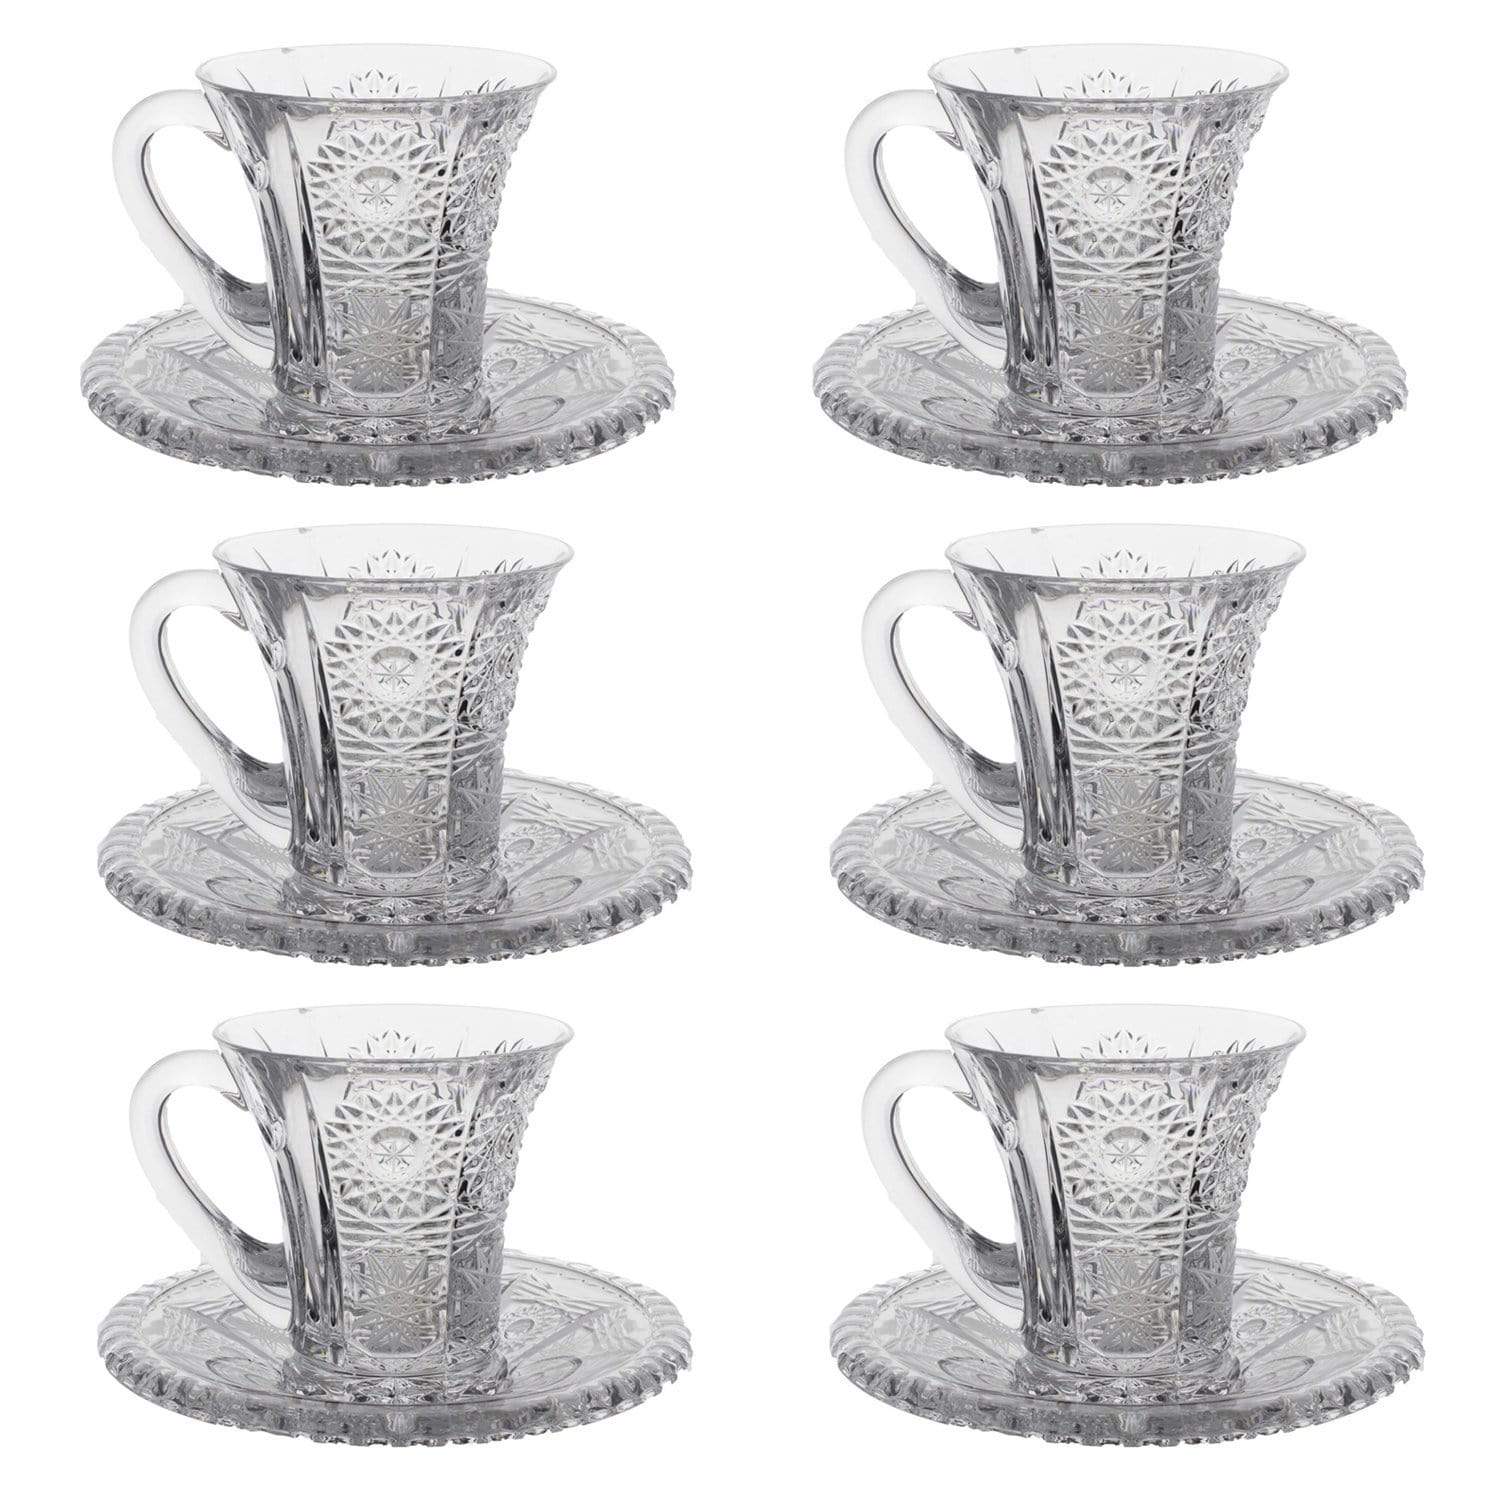 Bohemia Crystal Glass Wellington Cup and Saucer Set - Clear_57001_842 - 5392160 - Jashanmal Home